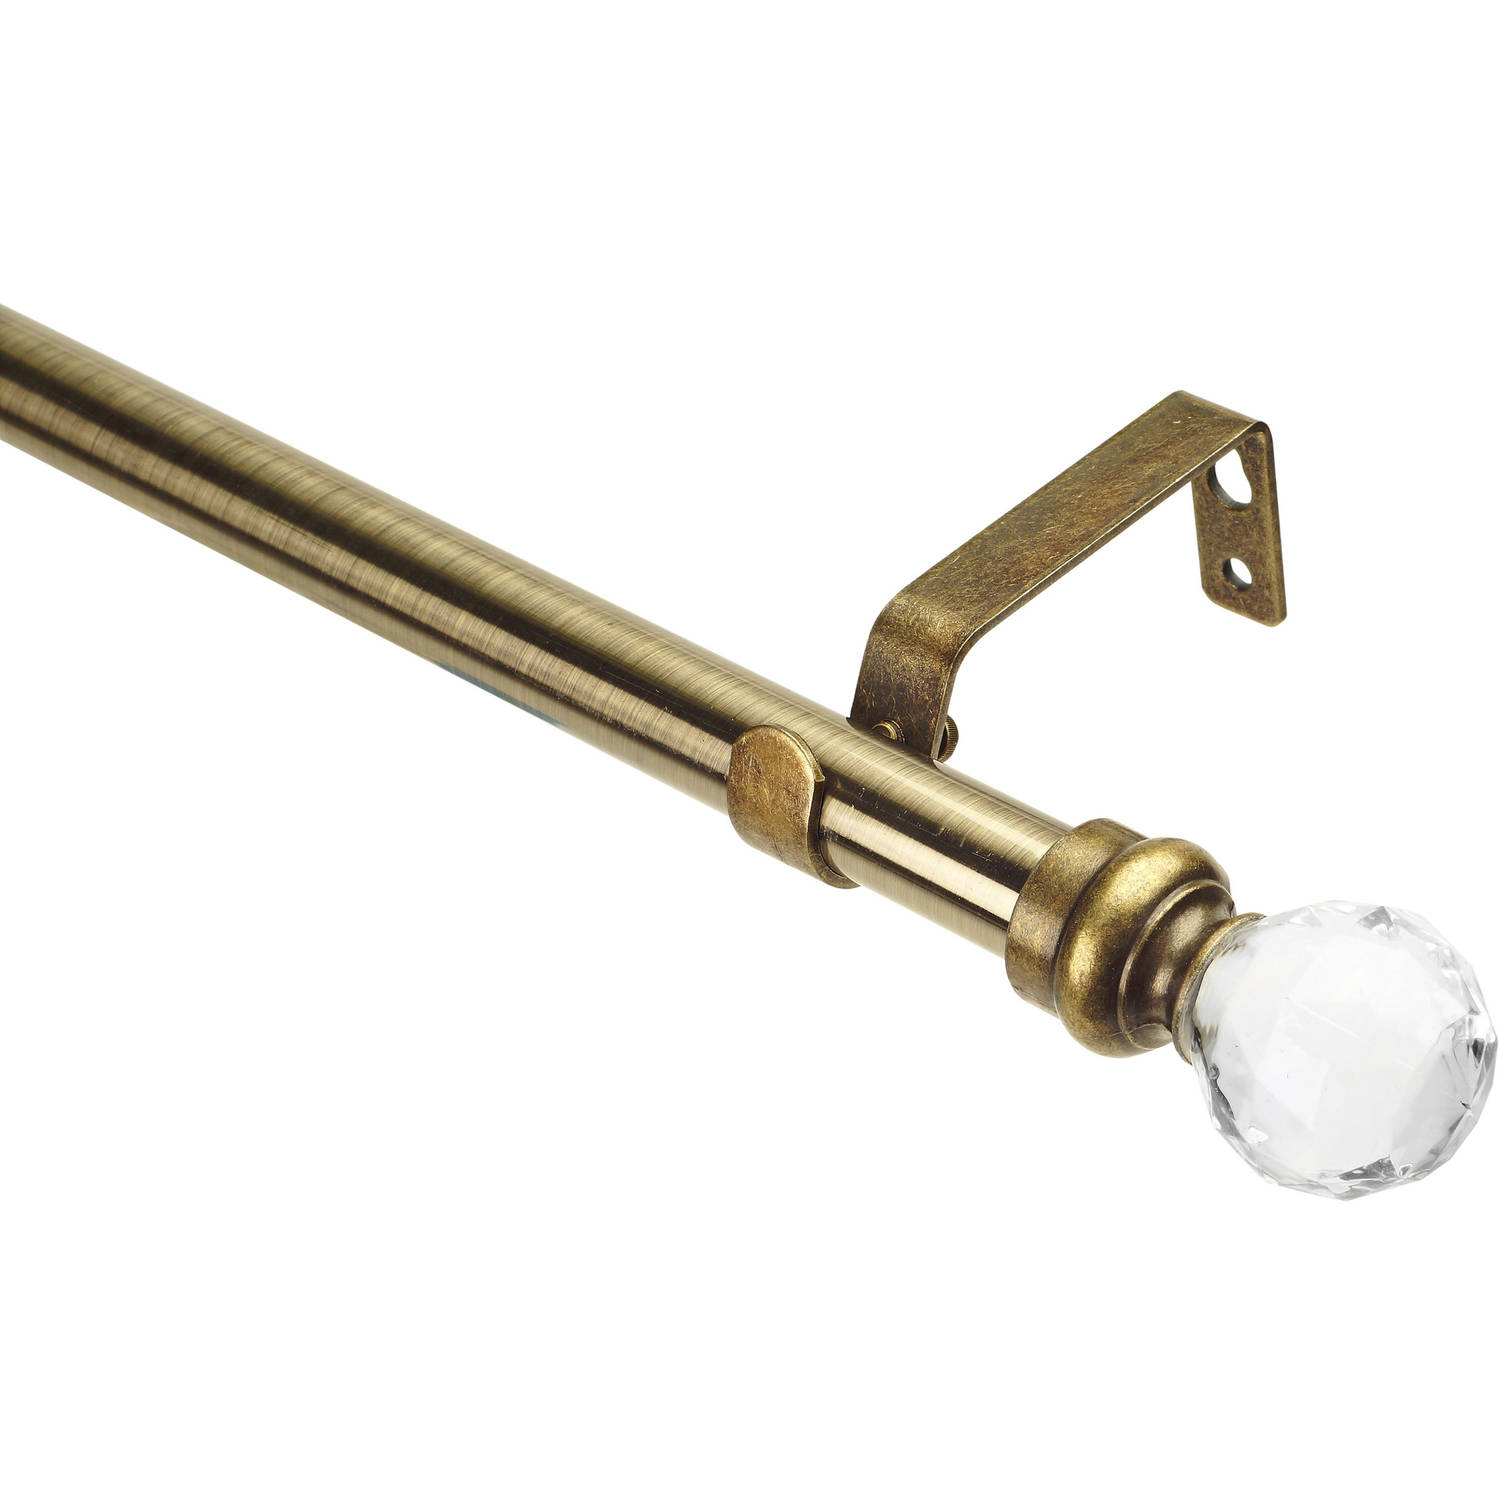 Home Details Crystal Ball Expandable Curtain Rod 24"- 48", Antique Brass - image 2 of 2